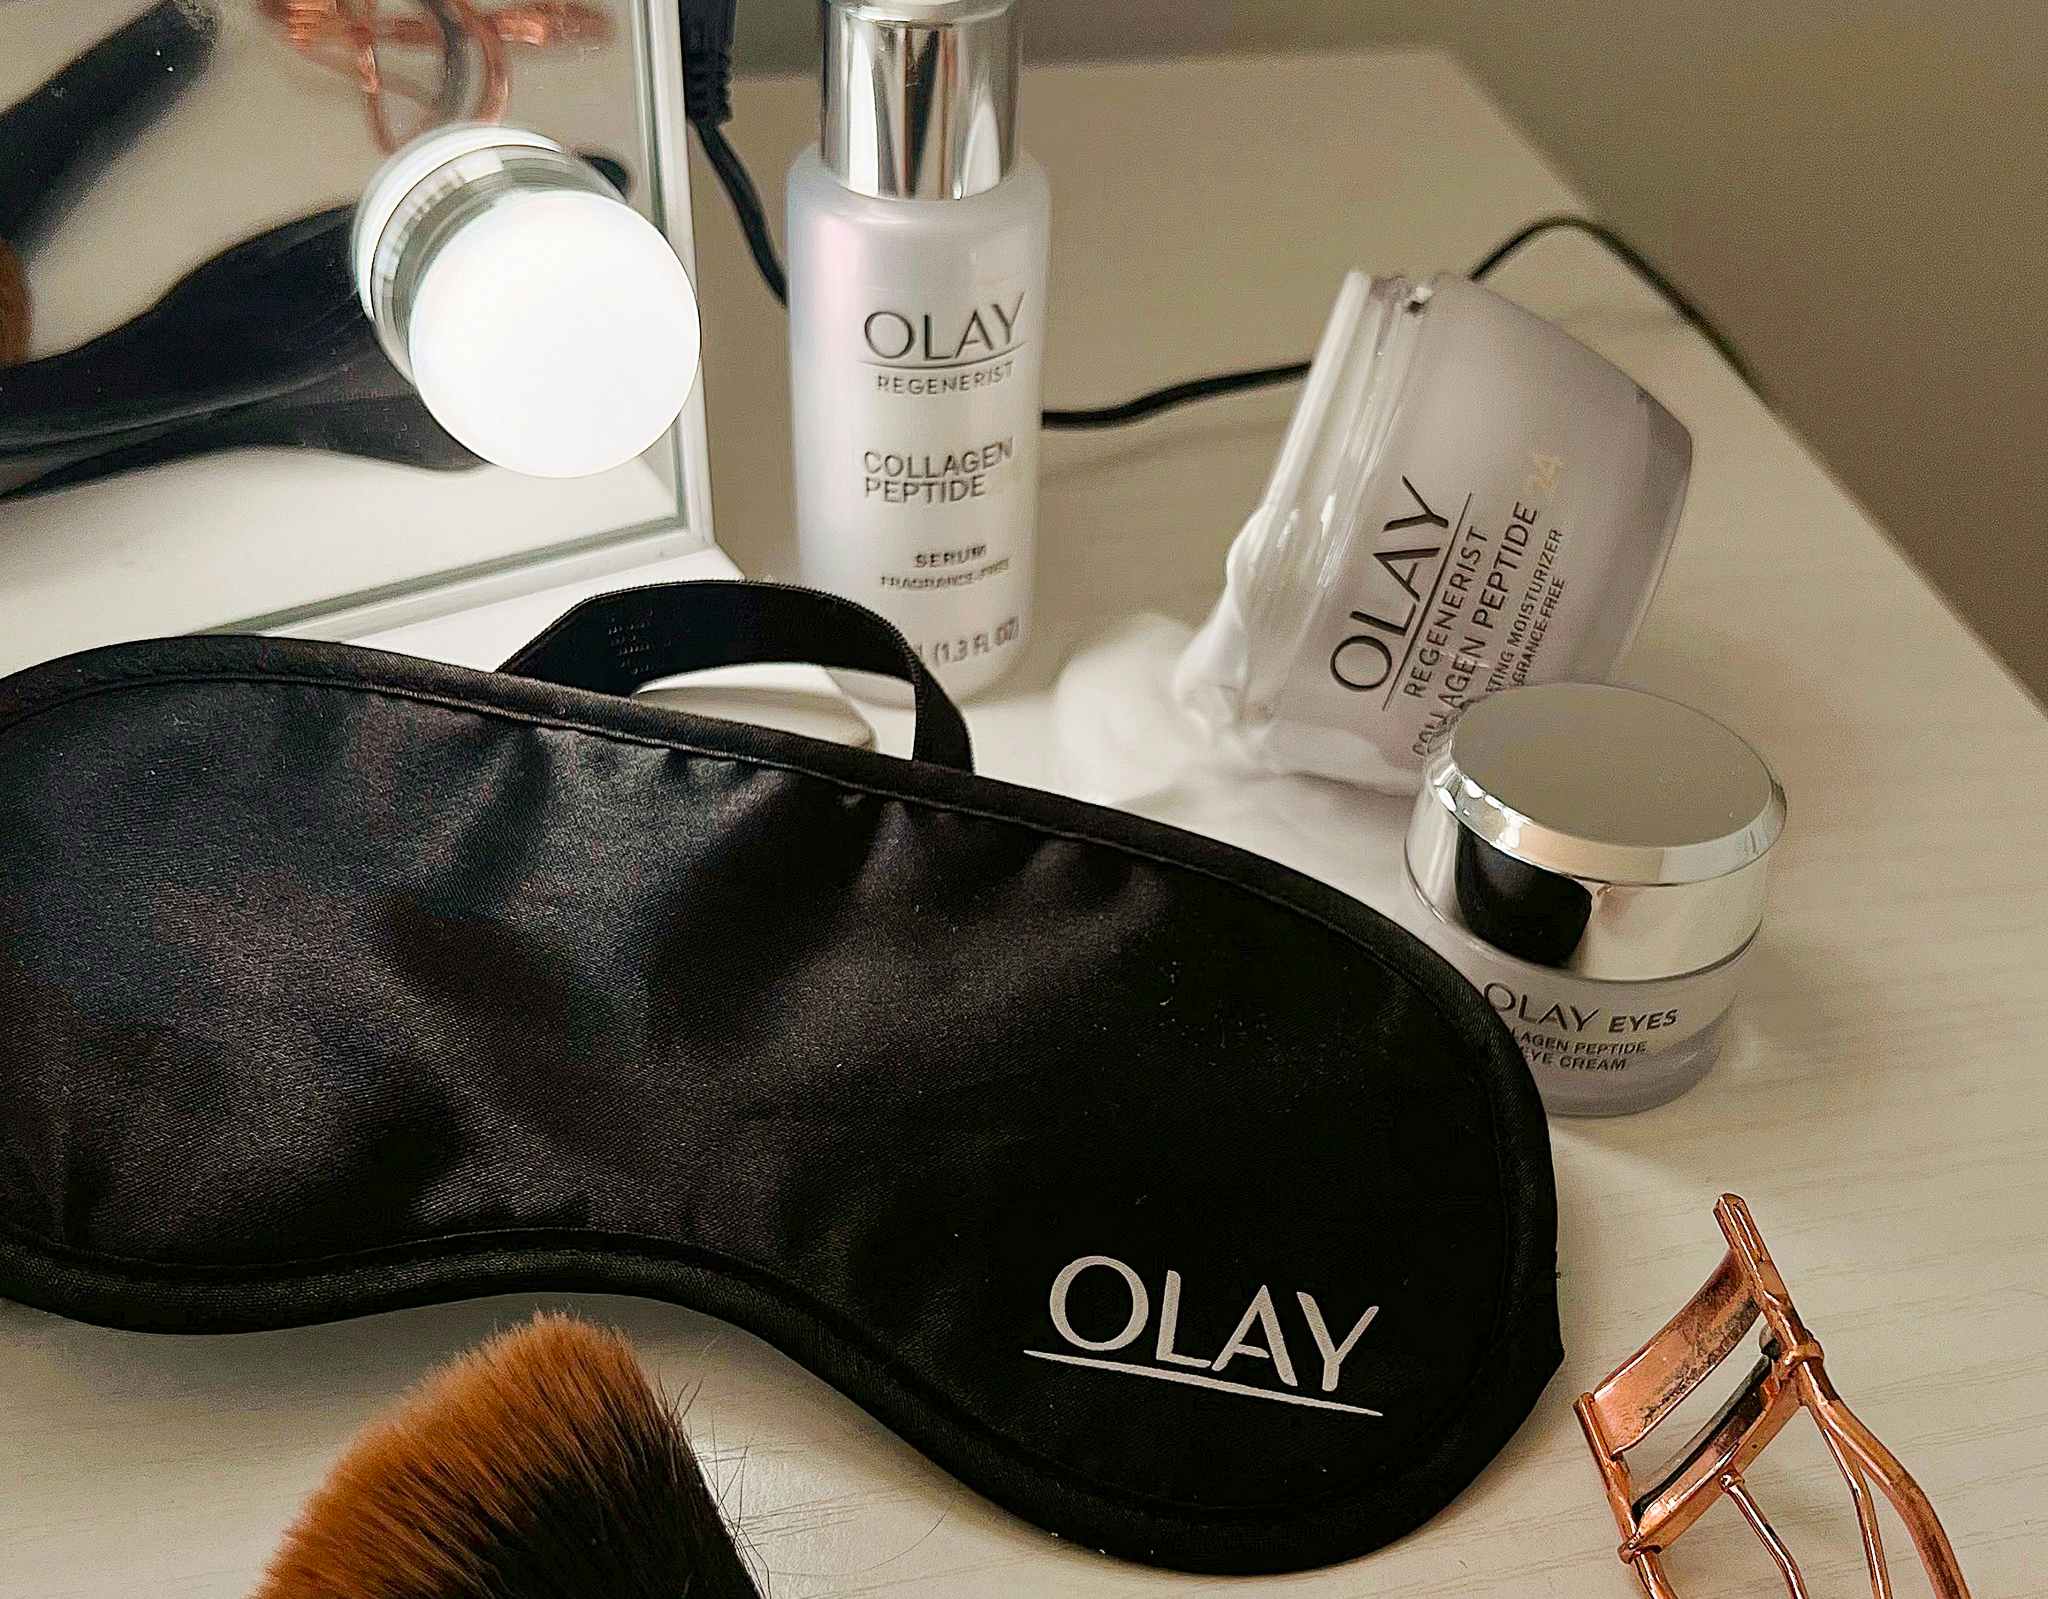 An Olay sleep mask on a vanity table with Olay products and other beauty tools.